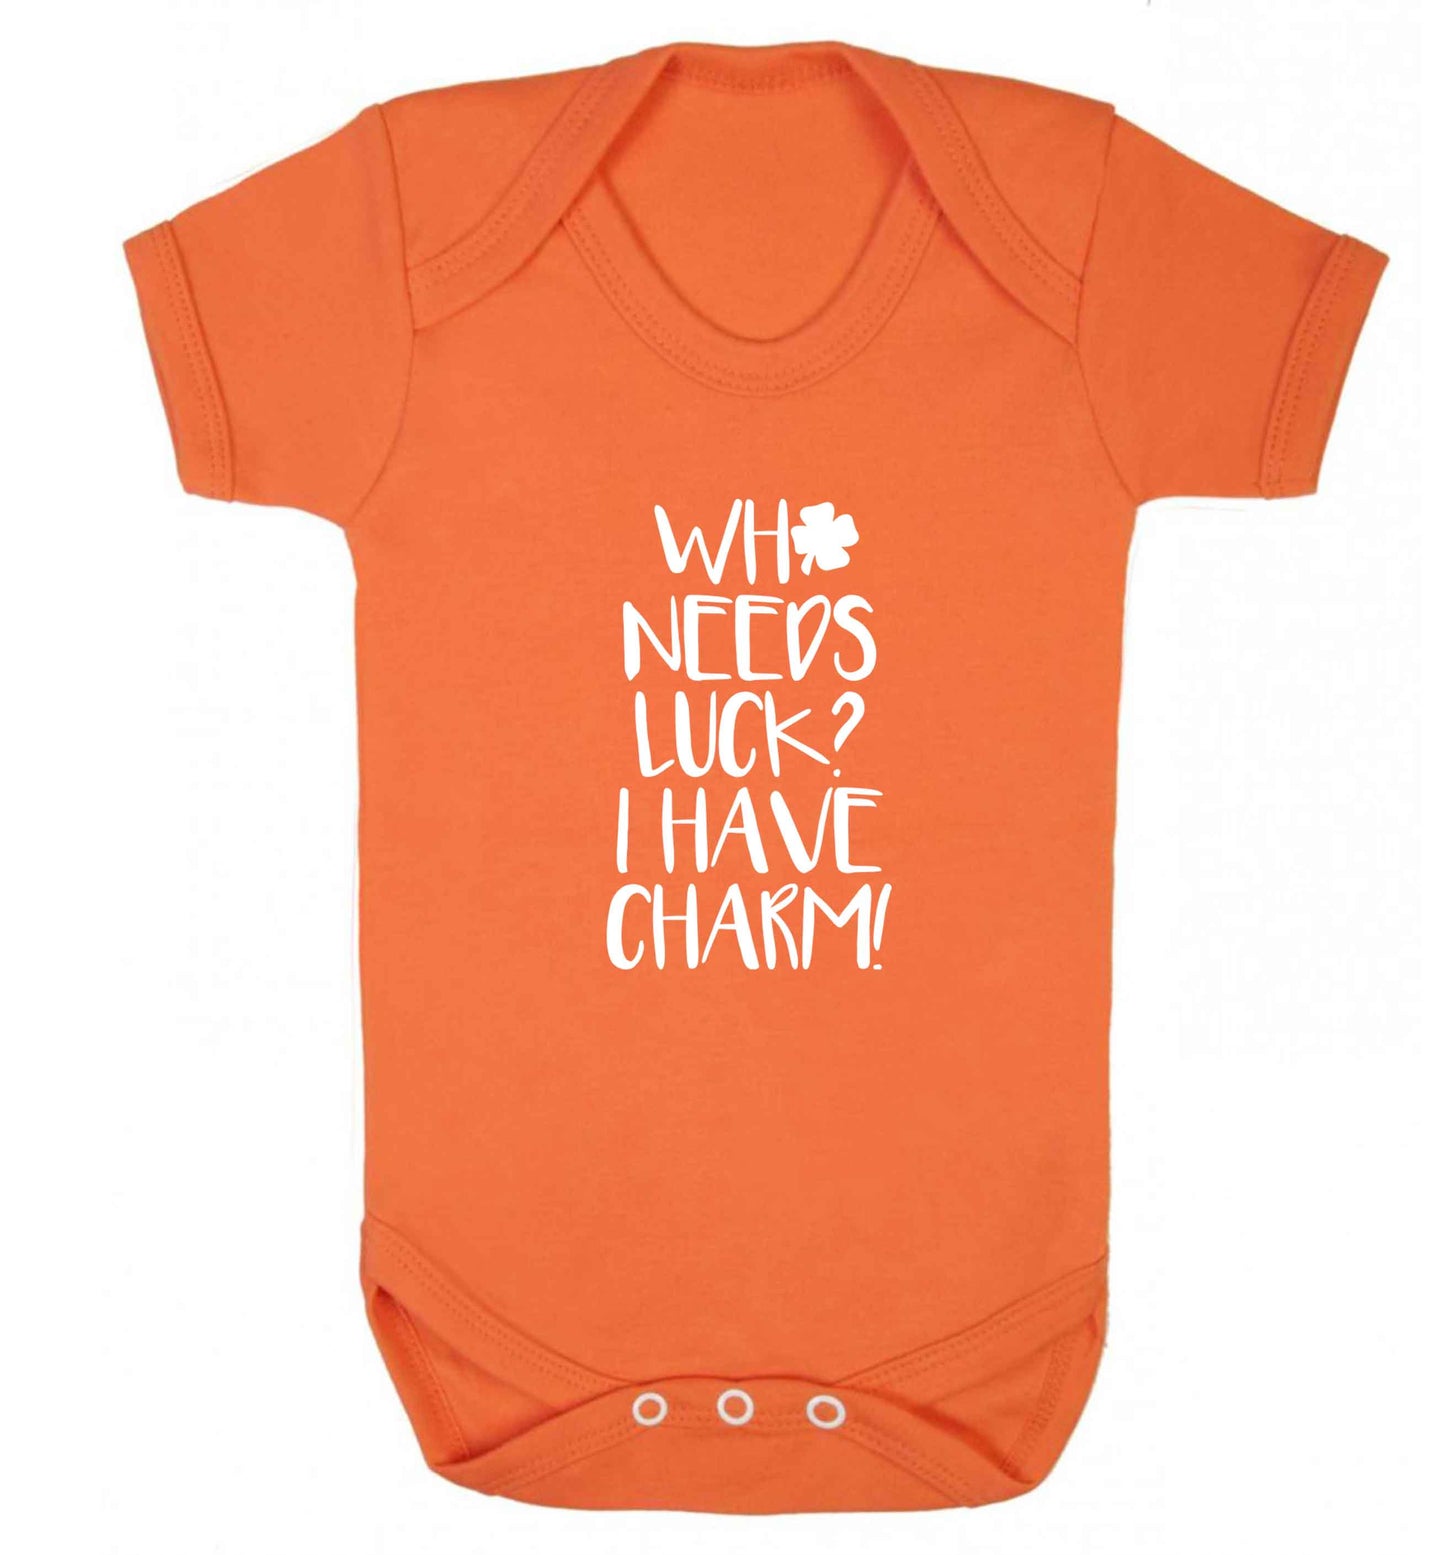 Who needs luck? I have charm! baby vest orange 18-24 months